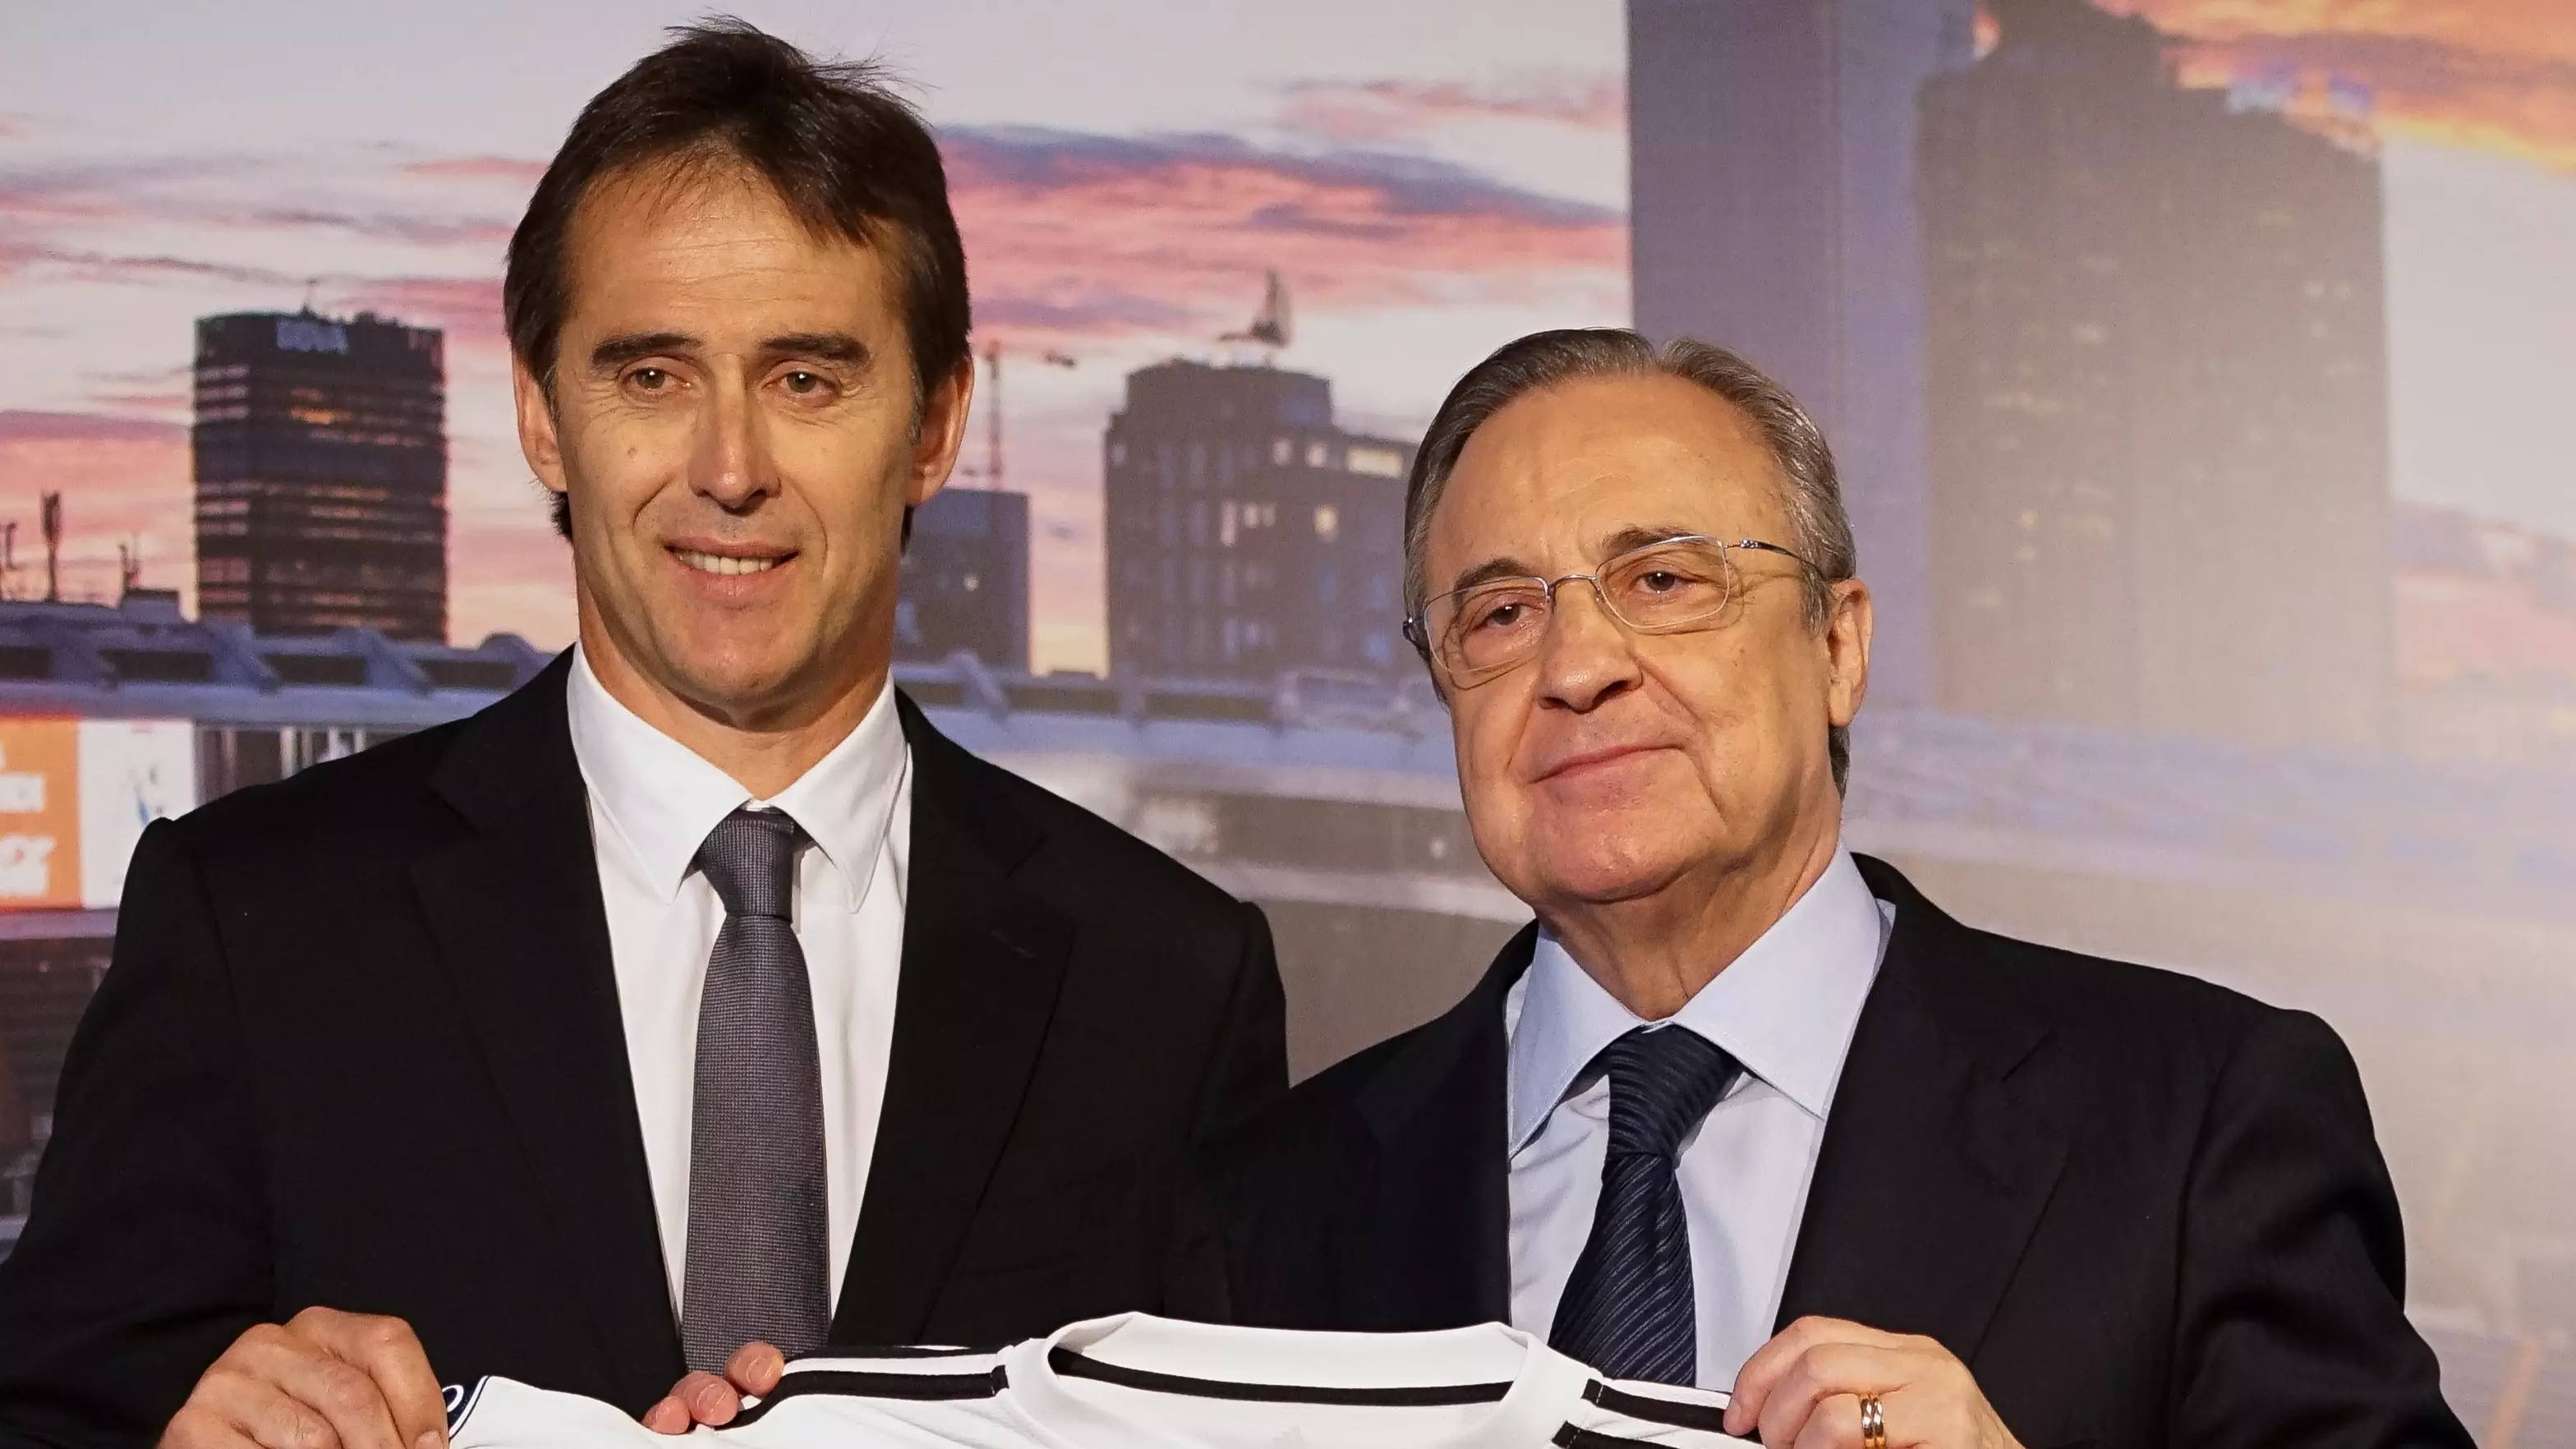 What Julen Lopetegui Has Asked The Real Madrid President To Do Might Upset Los Blancos Supporters